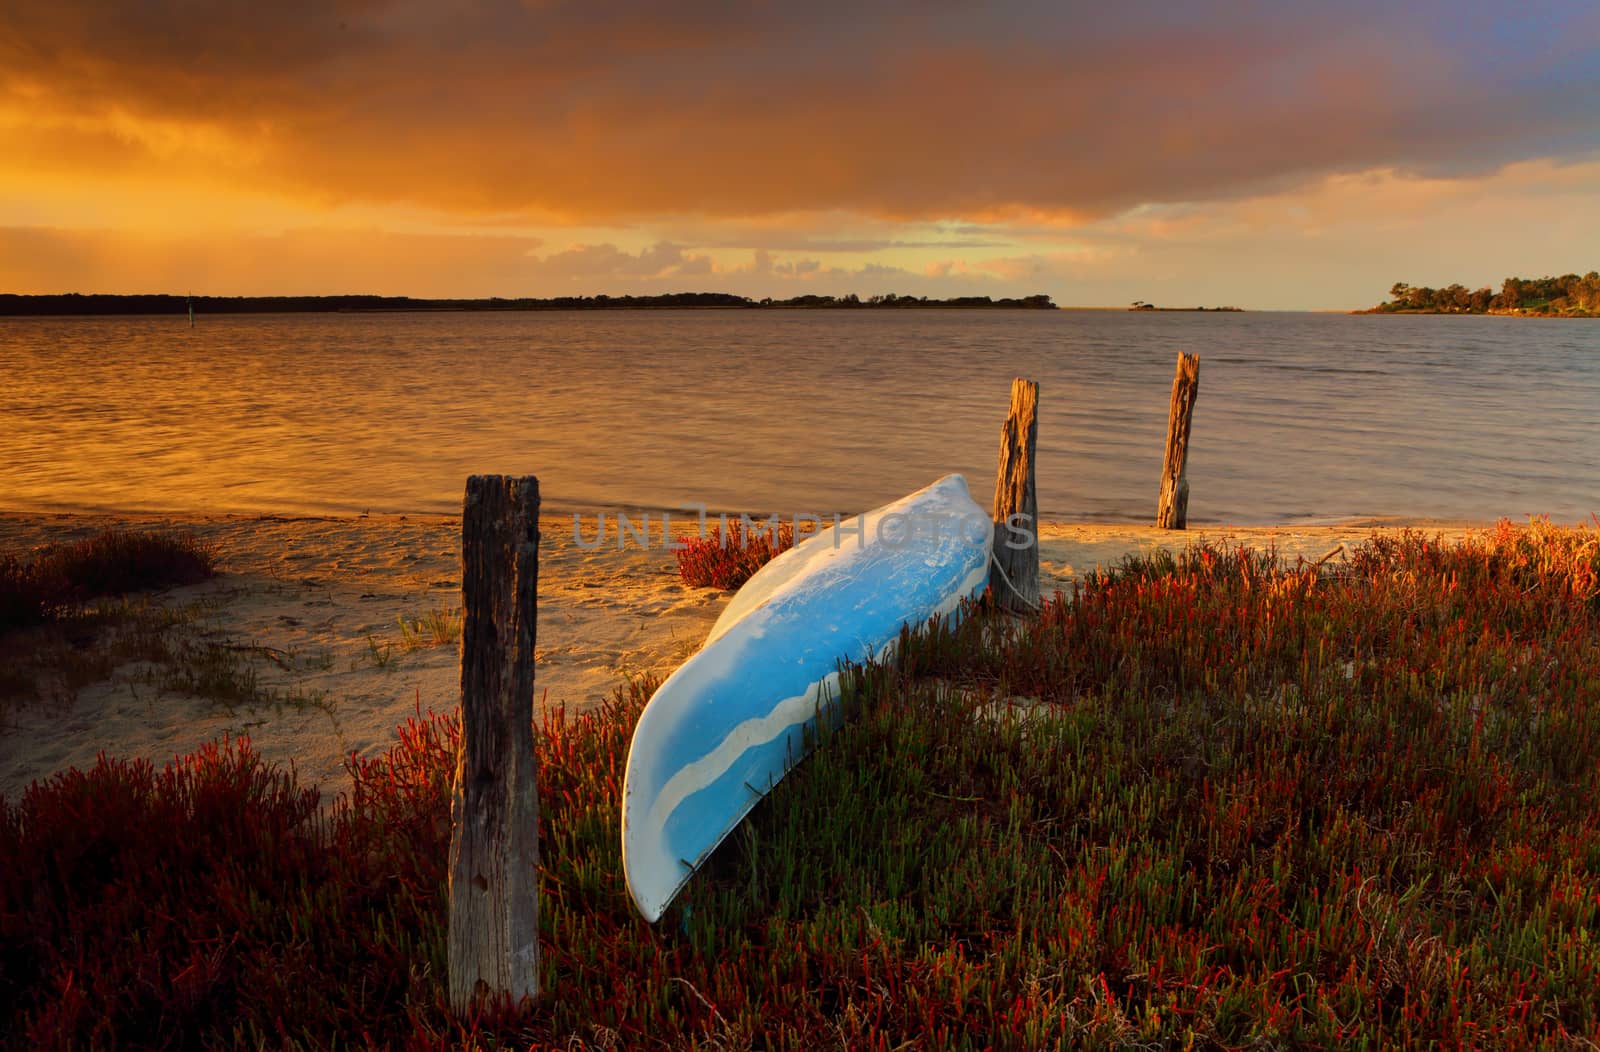 A blue canoe kayak upturned on the sandy shore full of fire sticks in bloom as a vibrant sunrise lights up the sky.